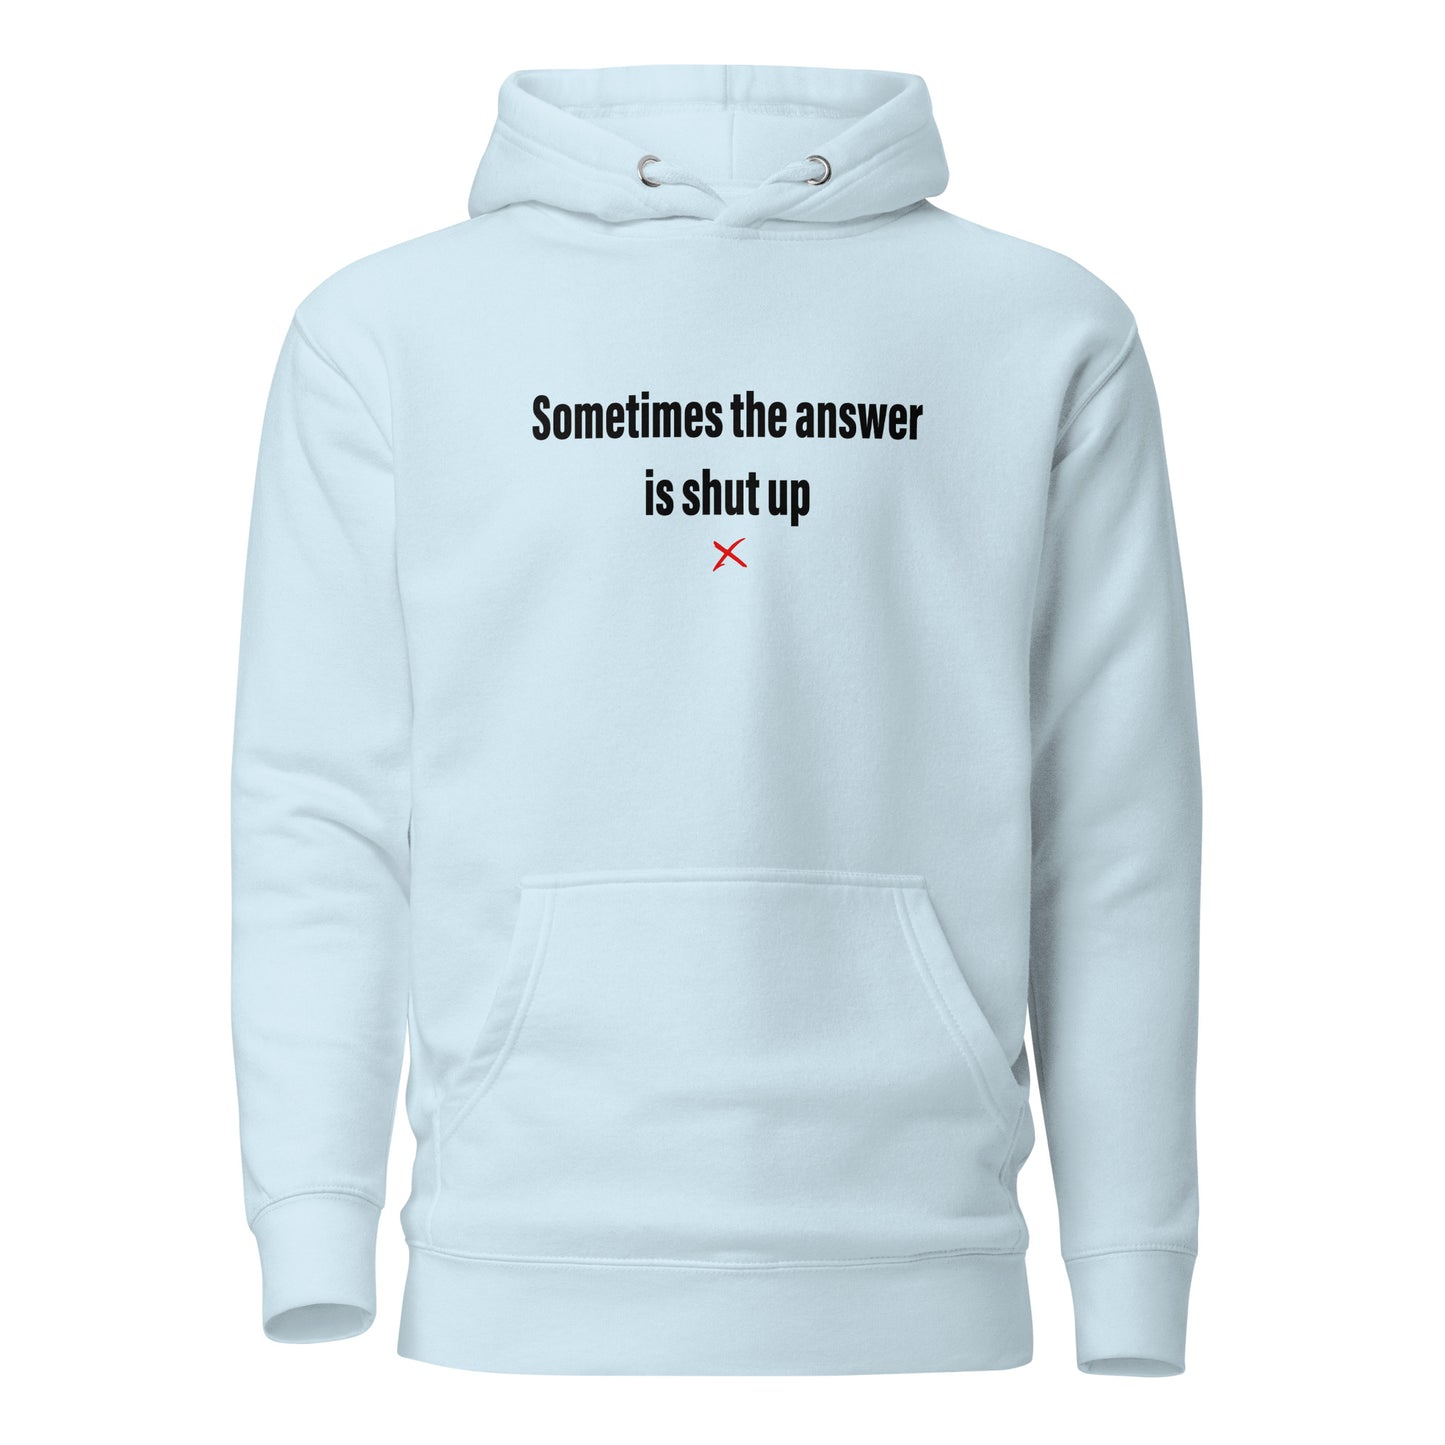 Sometimes the answer is shut up - Hoodie